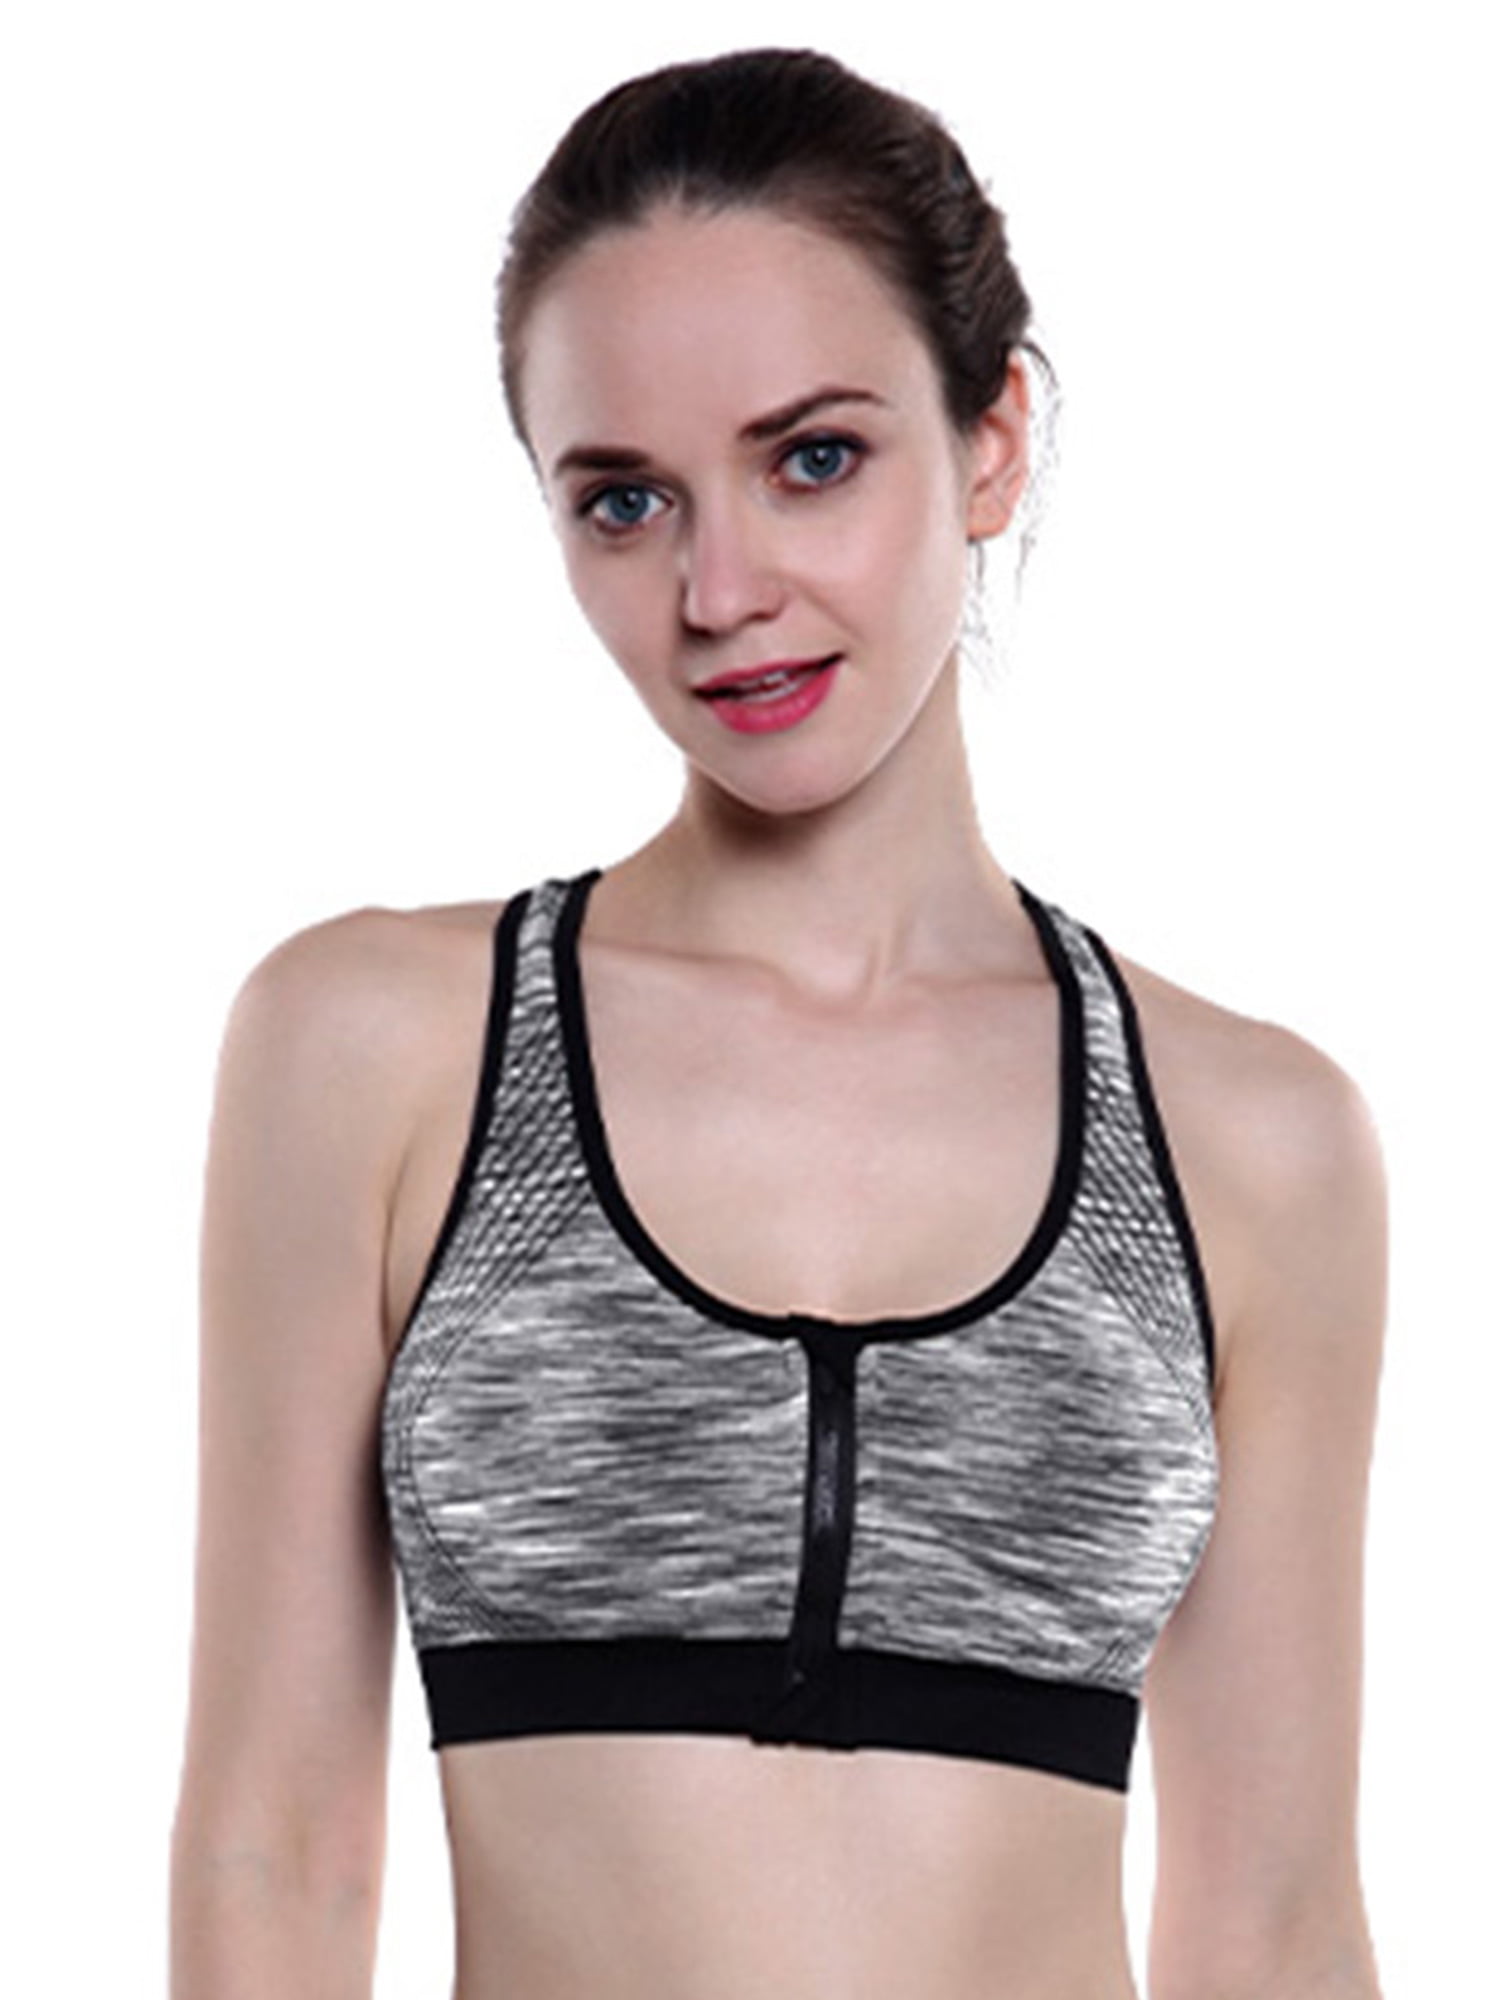 Details about   Women Zip Front Sports Bra High Impact Seamless Gym Fitness Yoga Padded Vest HOT